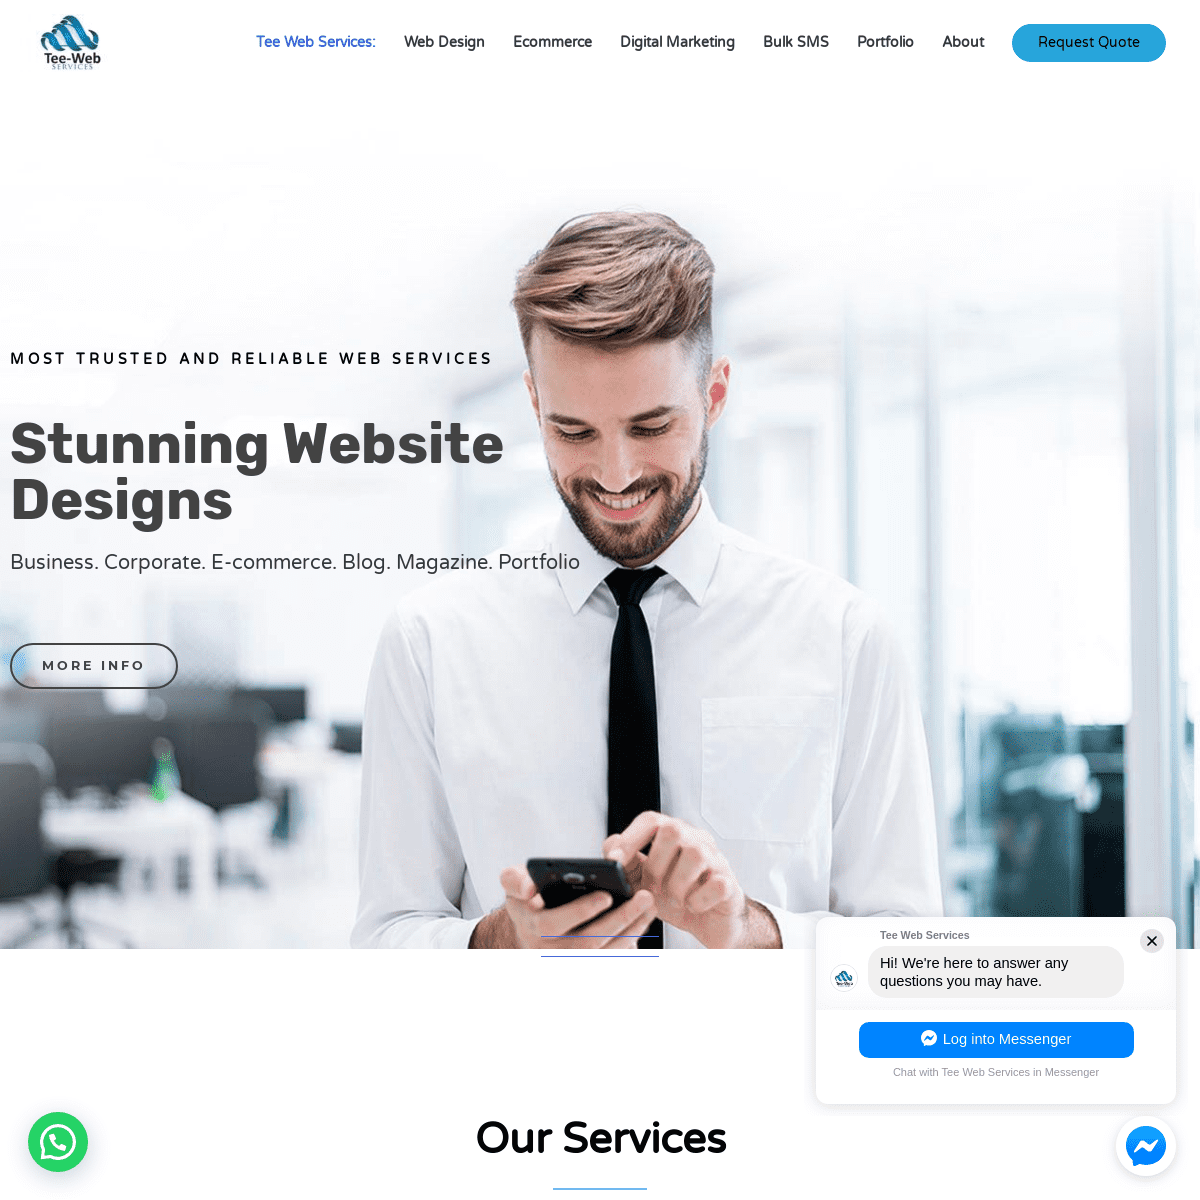 A complete backup of teewebservices.com.ng